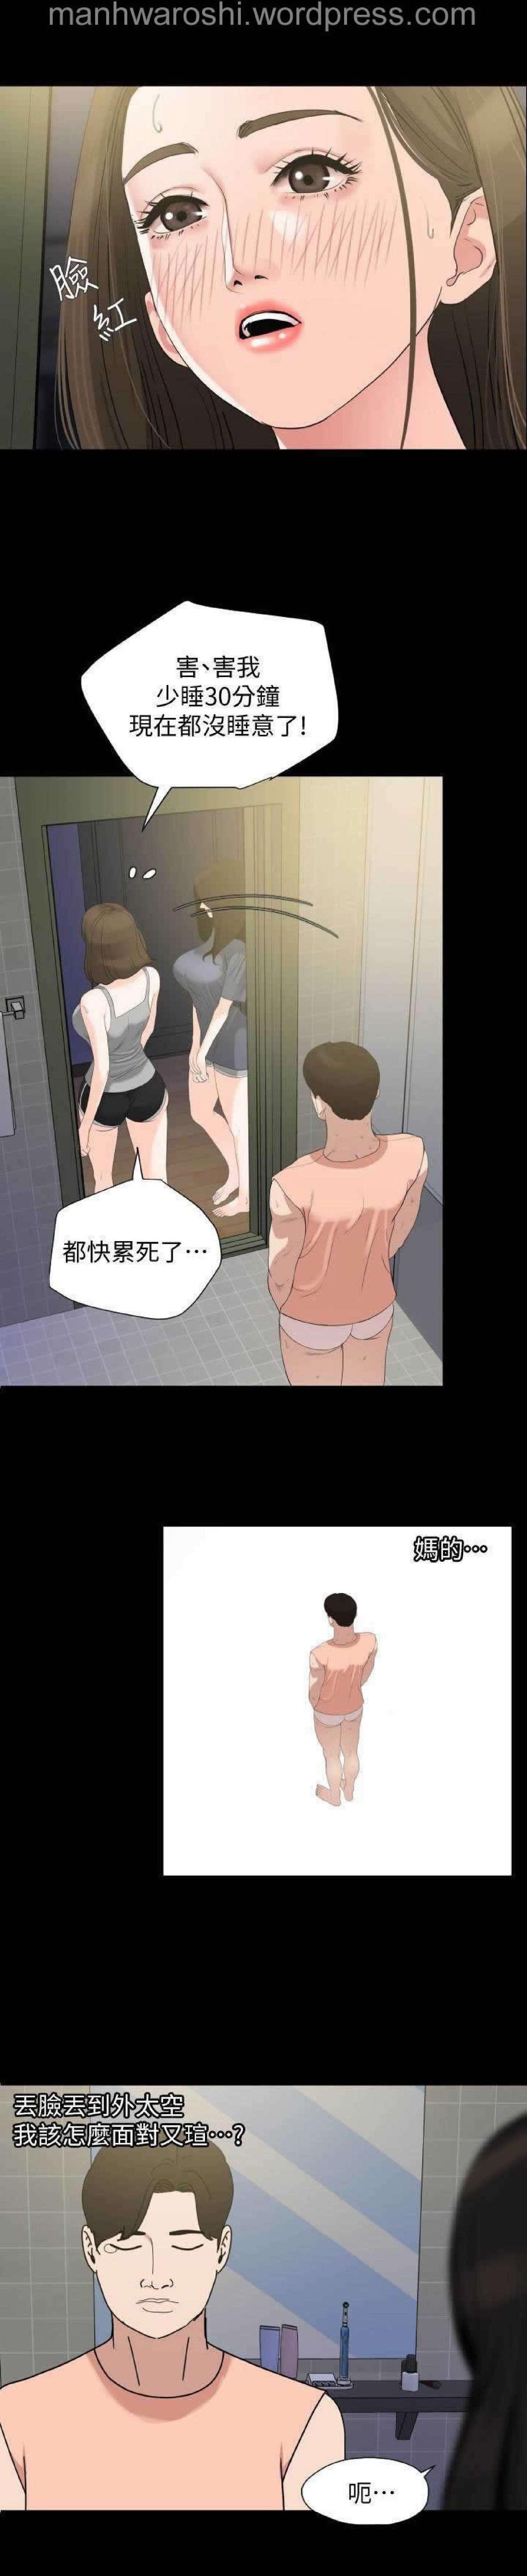 Don’t Be Like This! Son-In-Law | 与岳母同屋 第 7 [Chinese] Manhwa 3